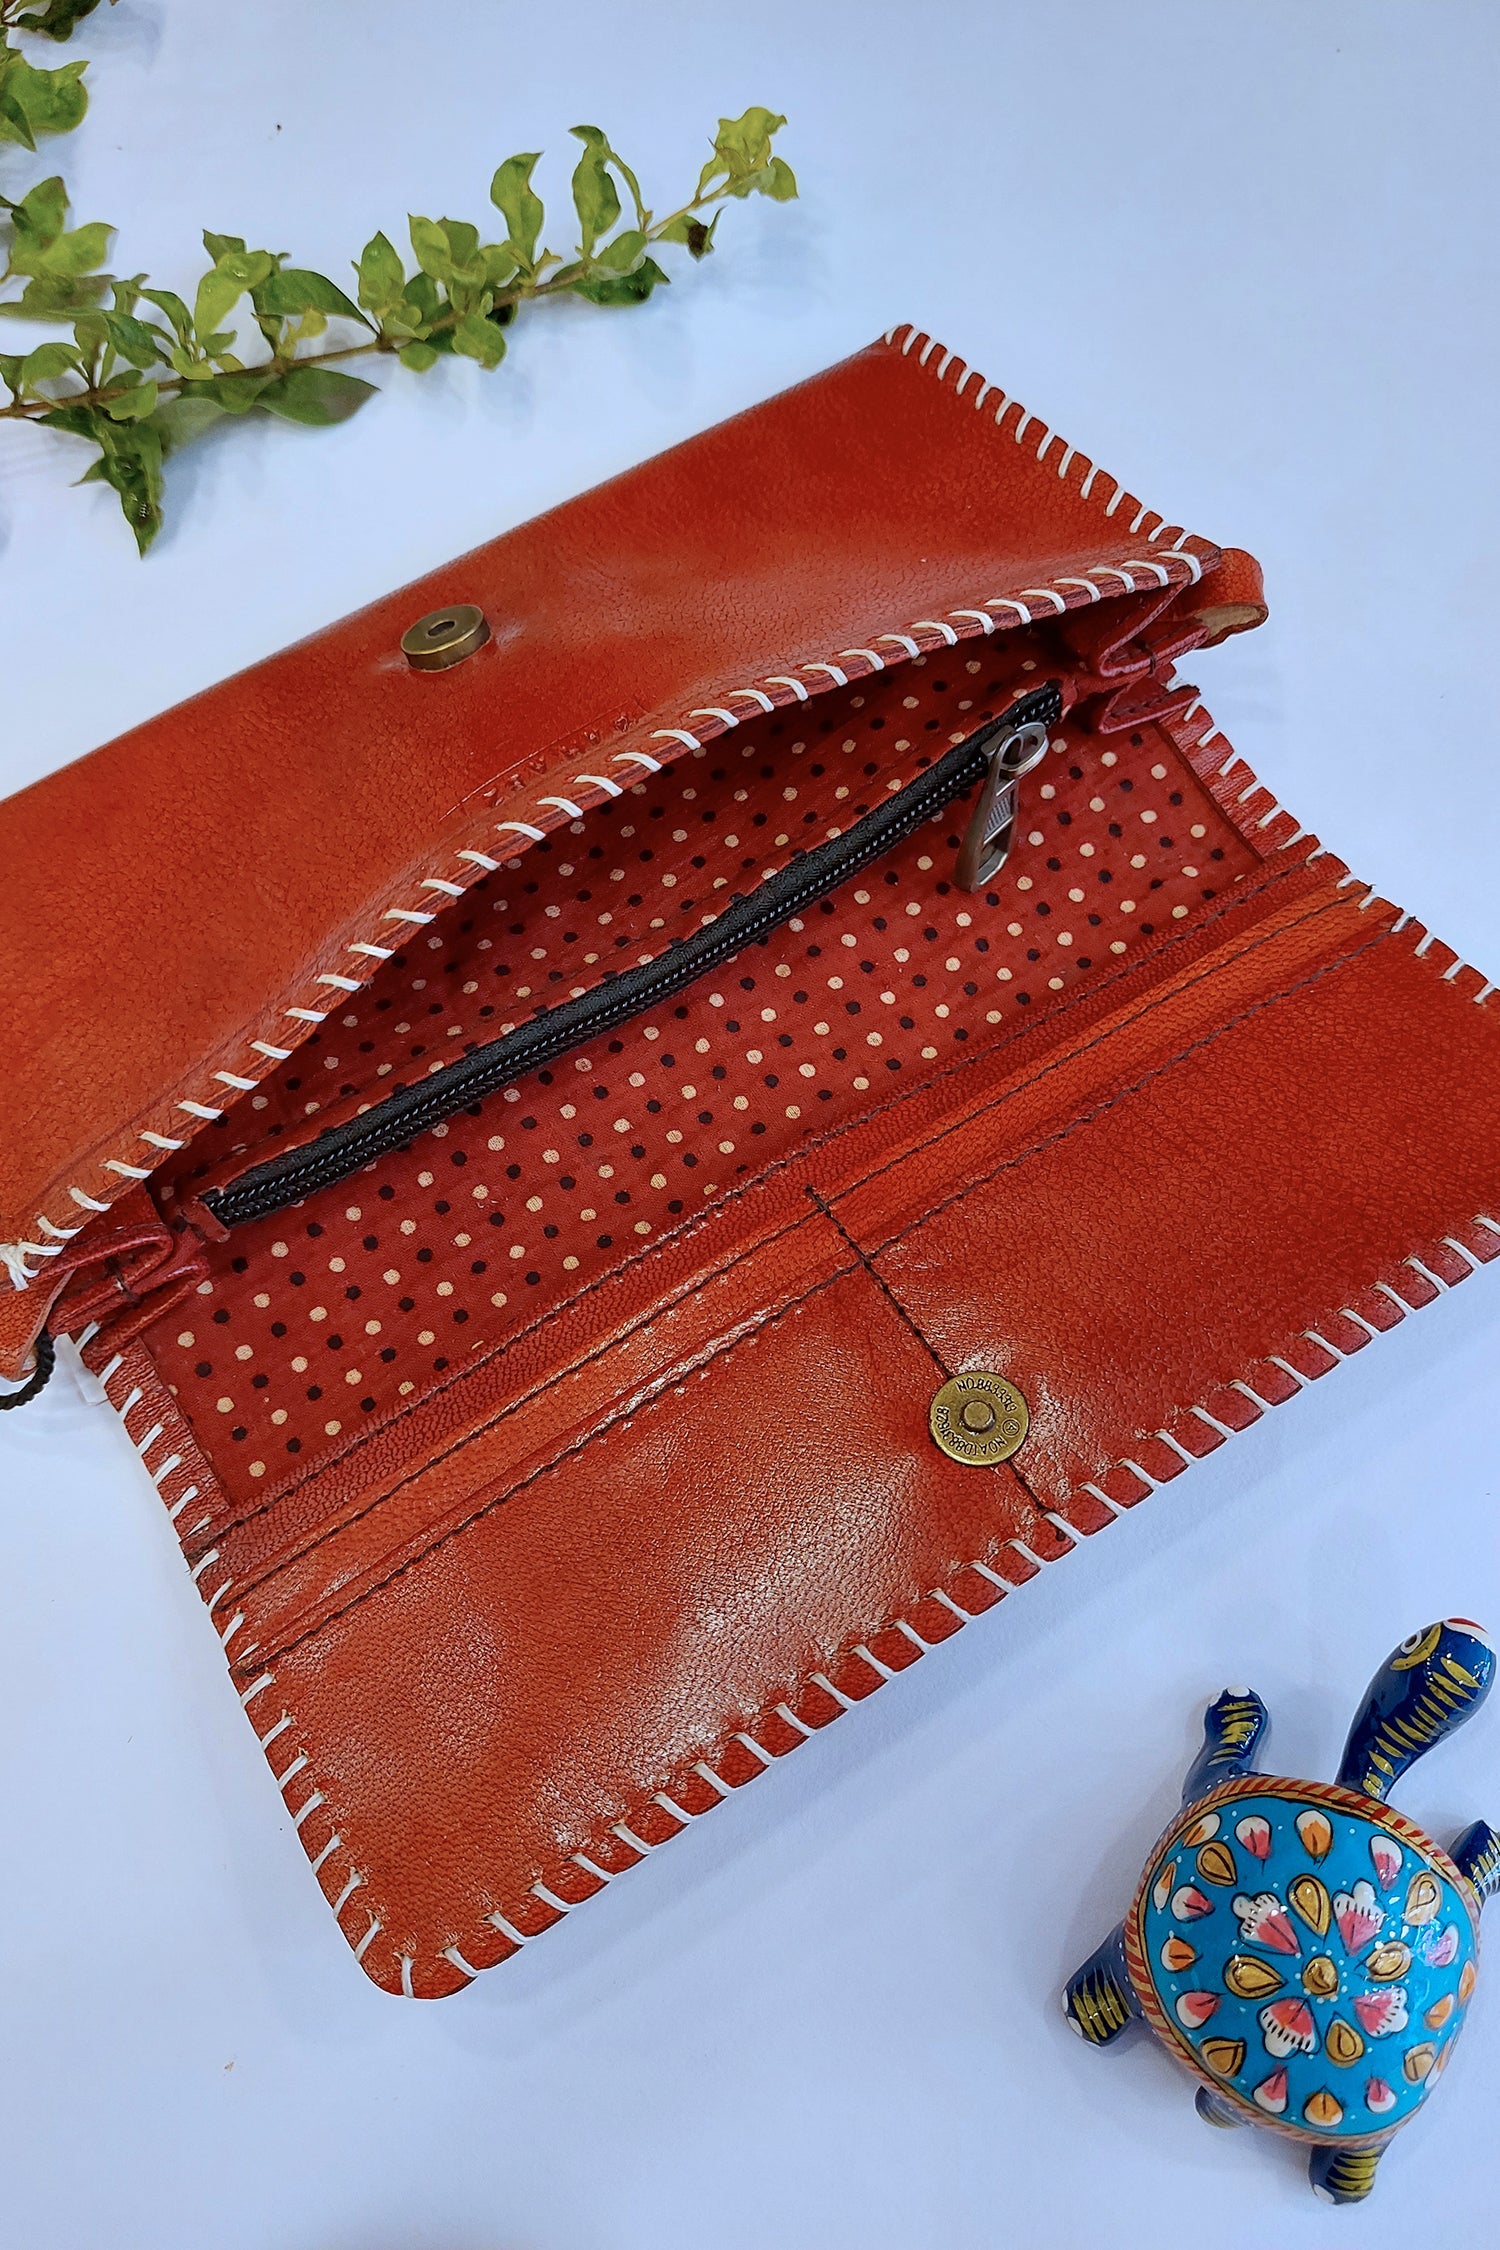 Handcrafted Genuine Leather Wallet with Jat Embroidery and Detachable Sling Sling Bag Handcrafted Genuine Leather Wallet with Jat Embroidery and Detachable Sling Sling Bag 